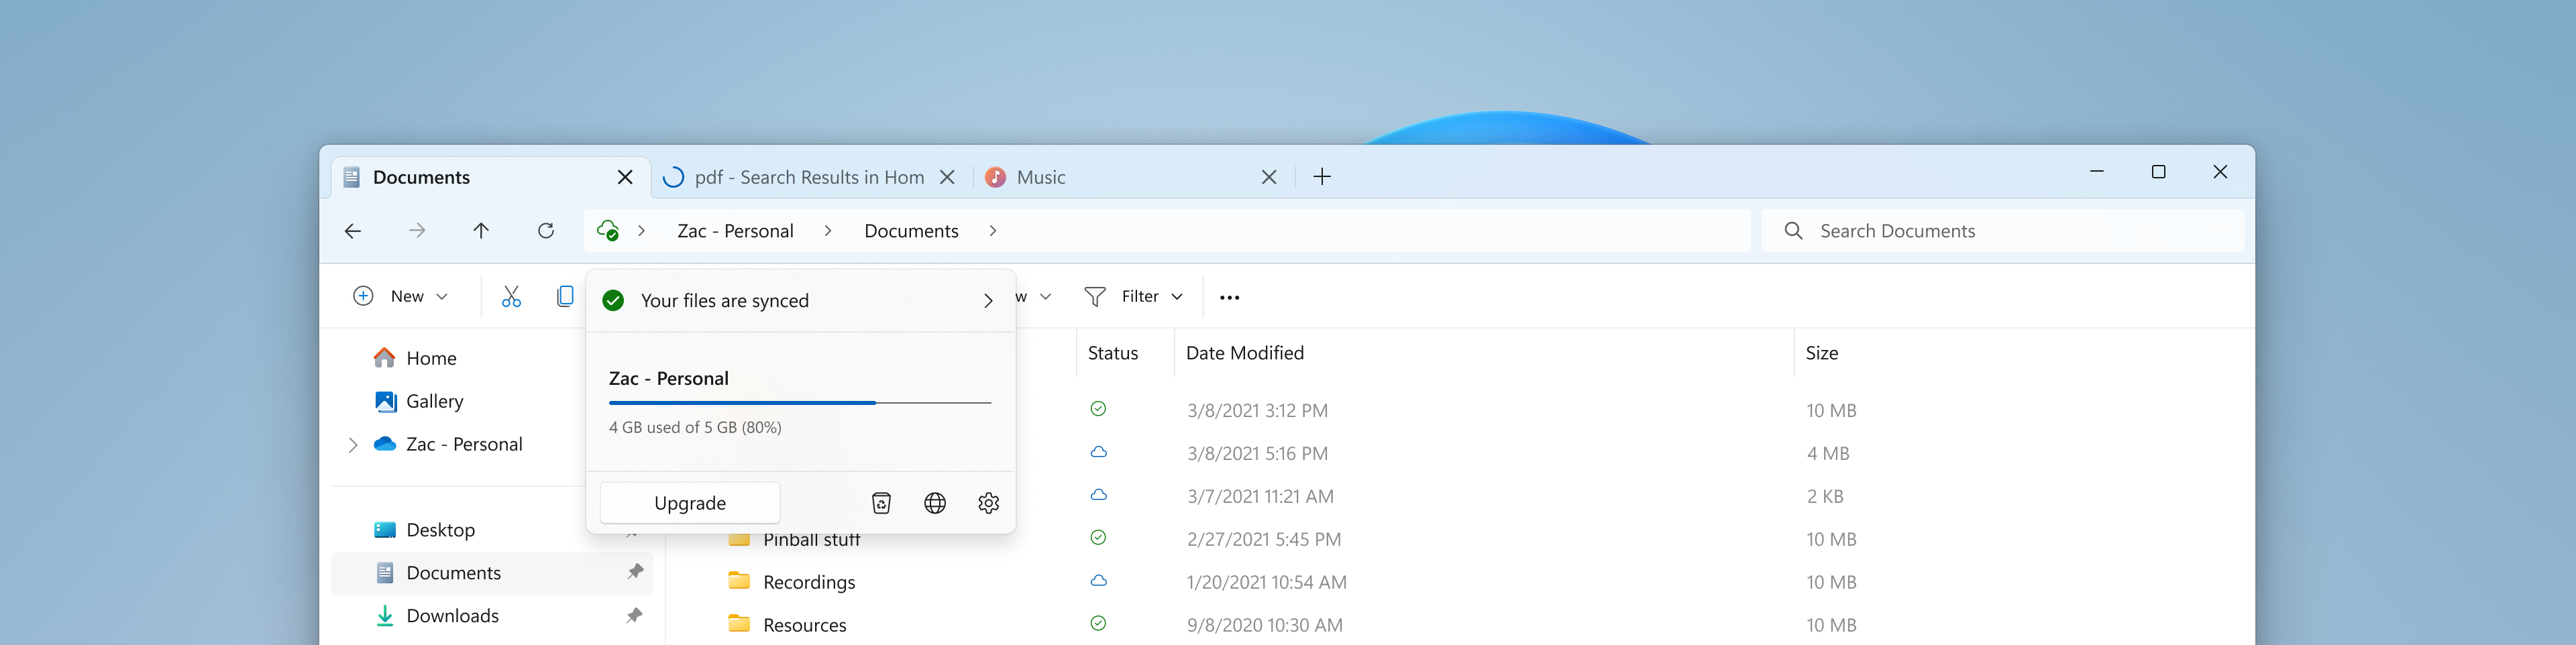 Modernized address bar in File Explorer with OneDrive sync and quota flyout